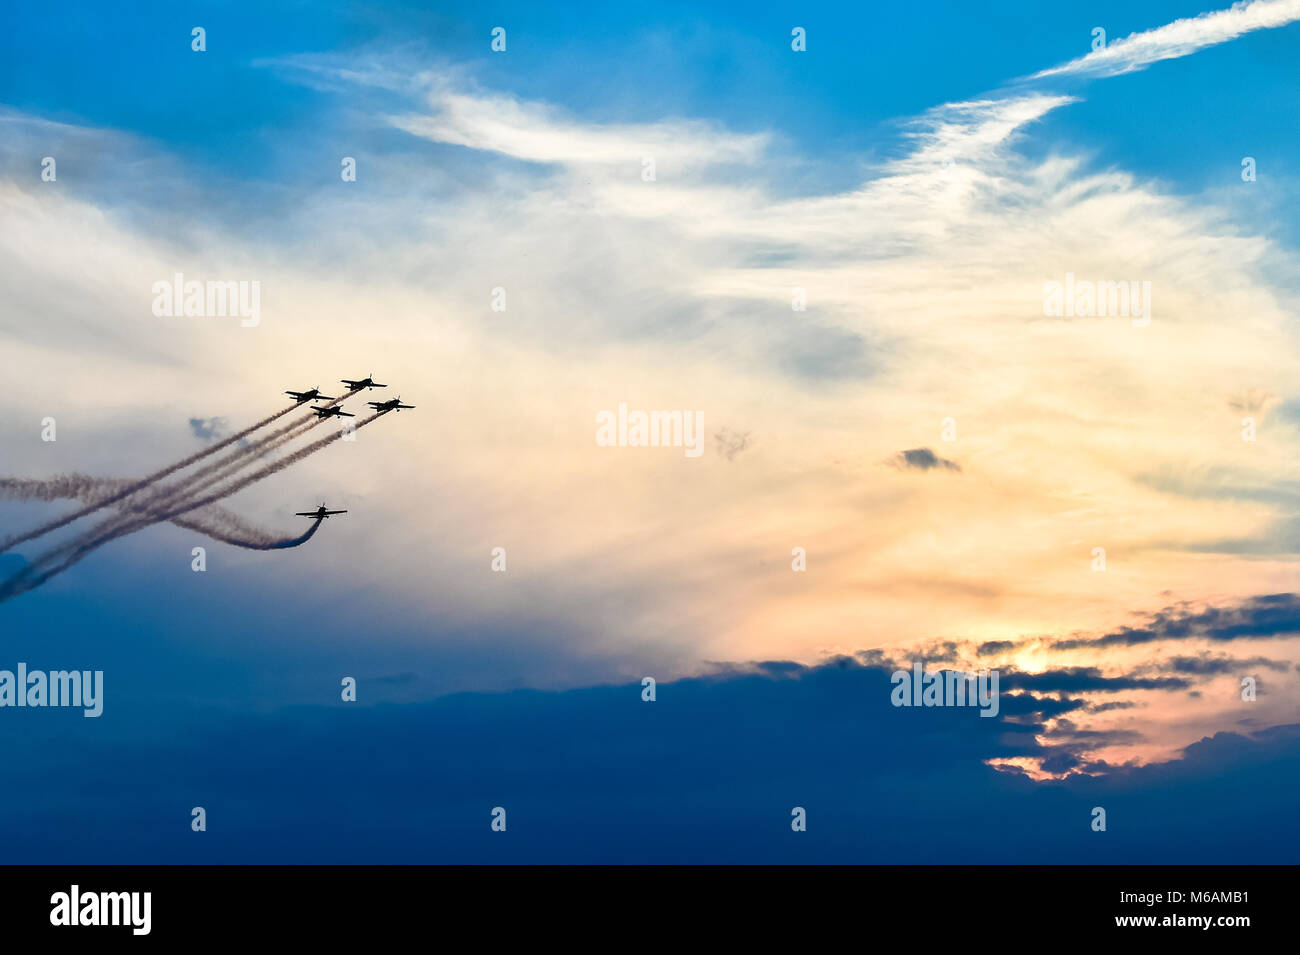 Acrobatic planes in action at an Airshow flying at sunset / dusk Stock Photo